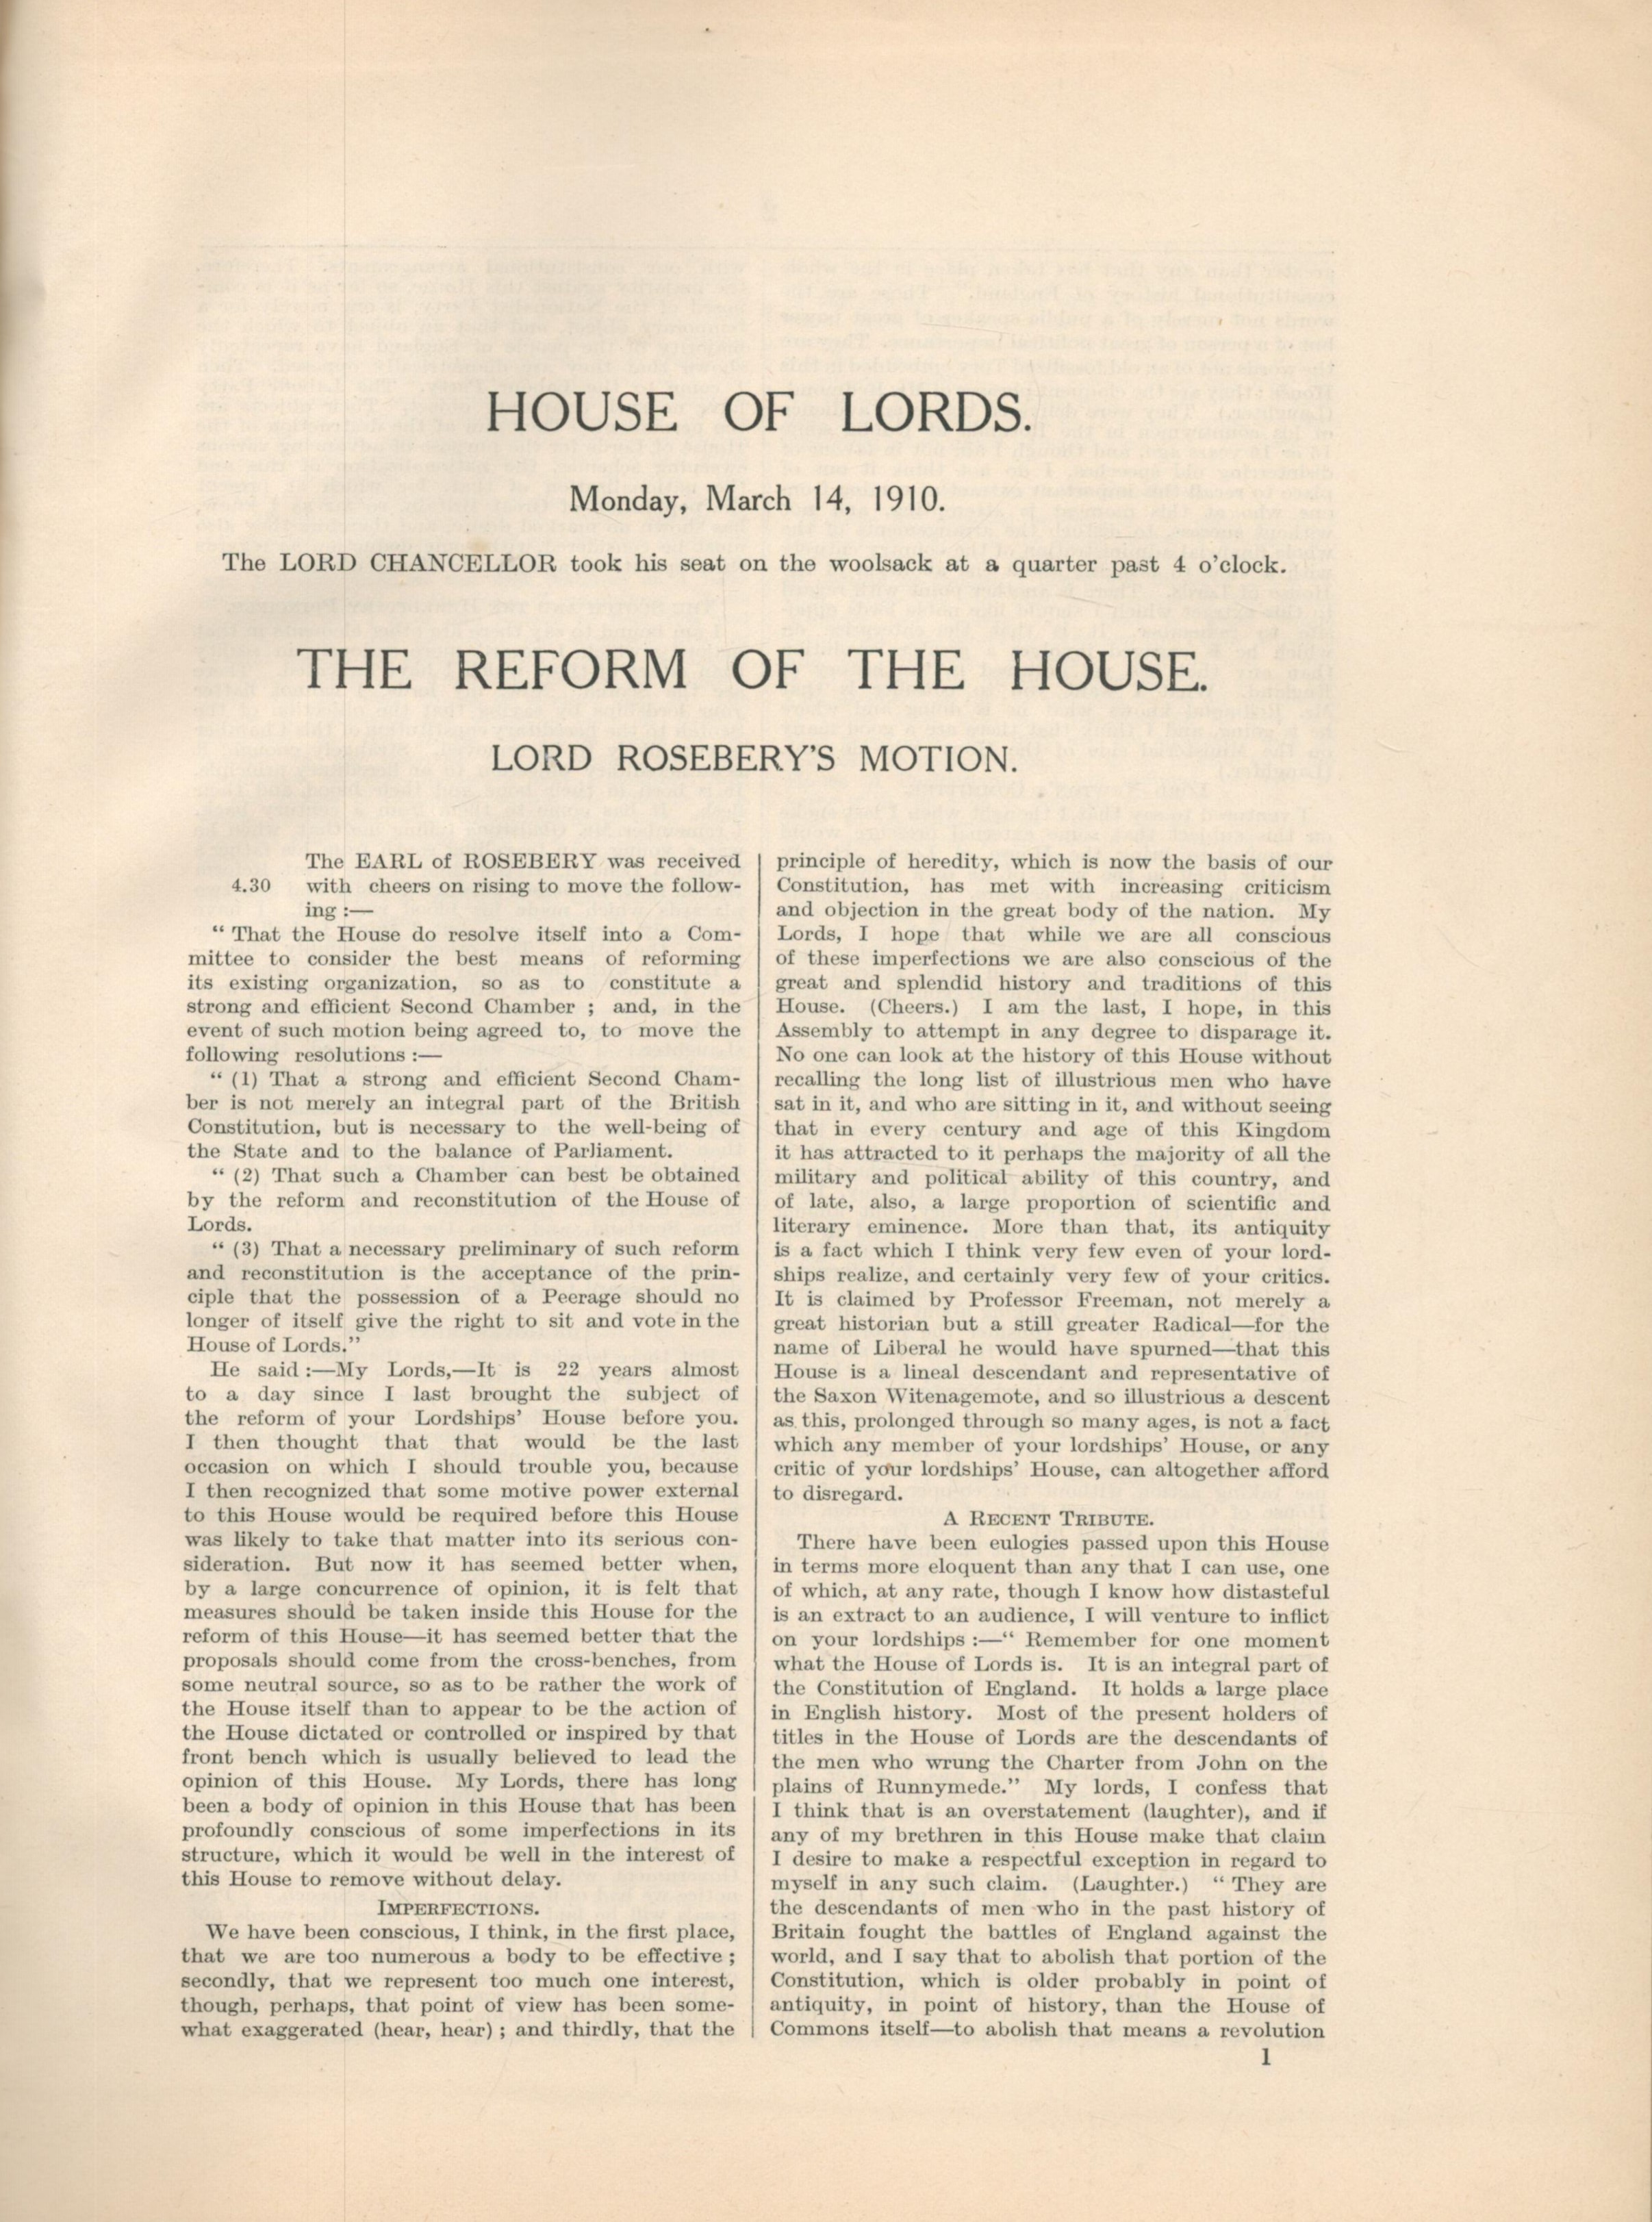 The Lords Debate on Lord Roseberry's Resolution. Reprinted from The Times, March 15th, 16t, 17th , - Image 2 of 2